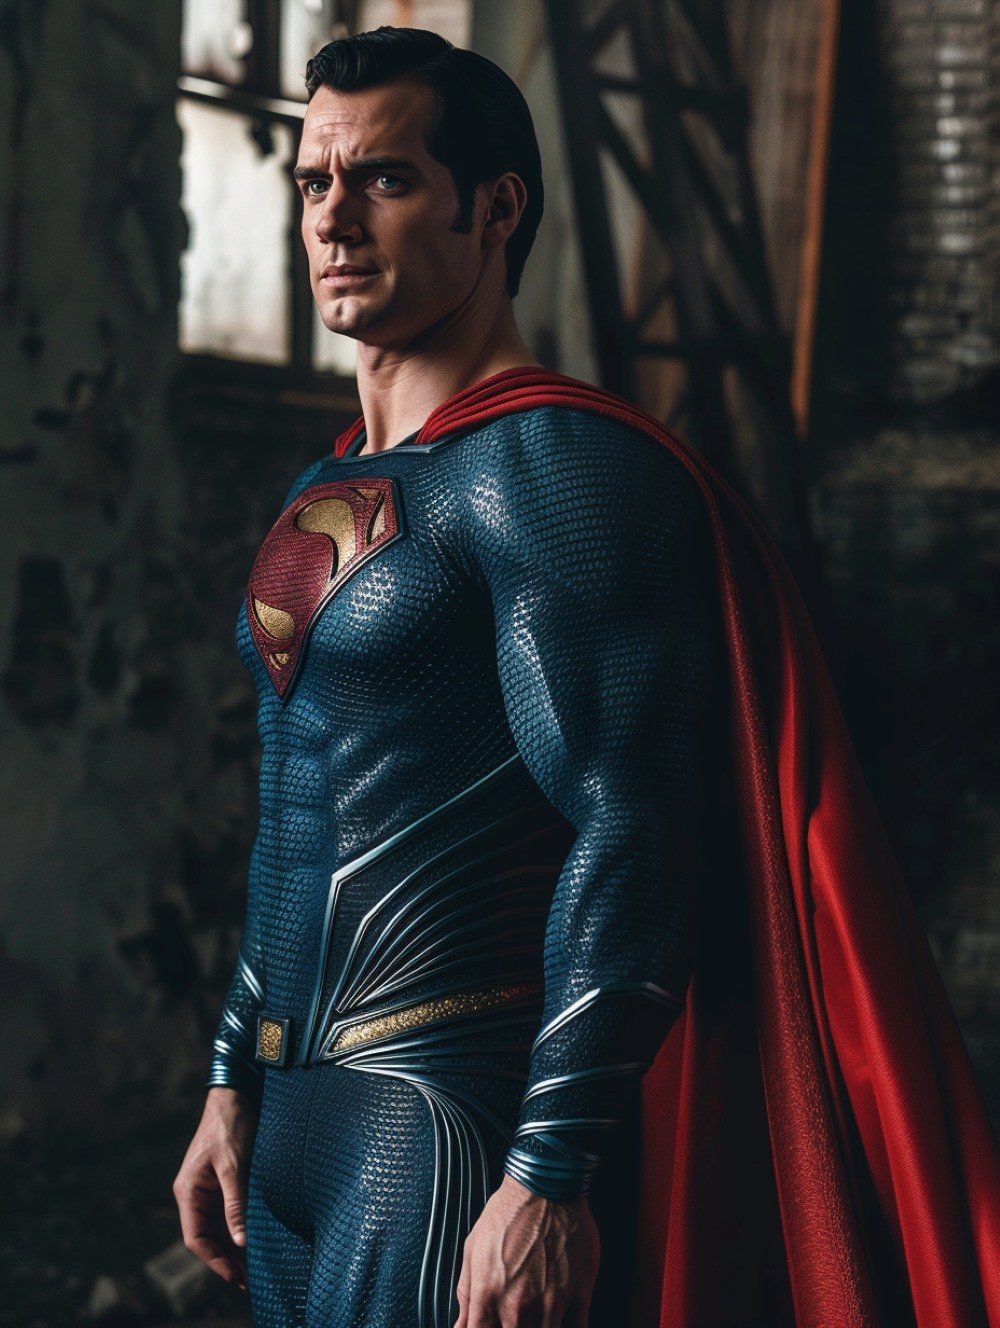 Superman is in a impressive stance